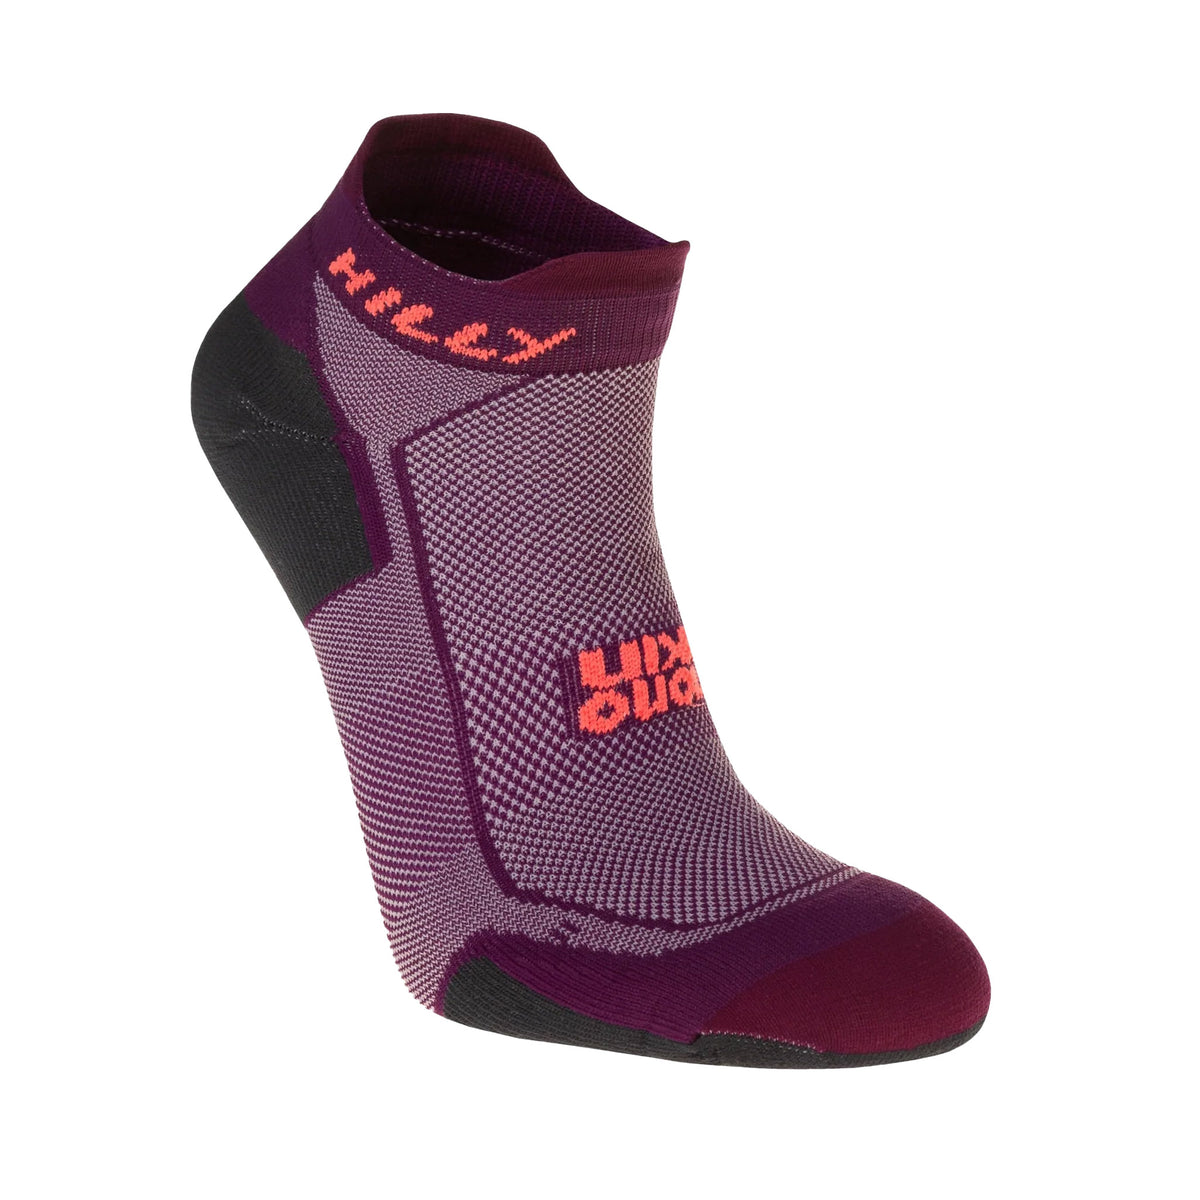 Hilly Active Socklet Min: Grape Juice/Charcoal